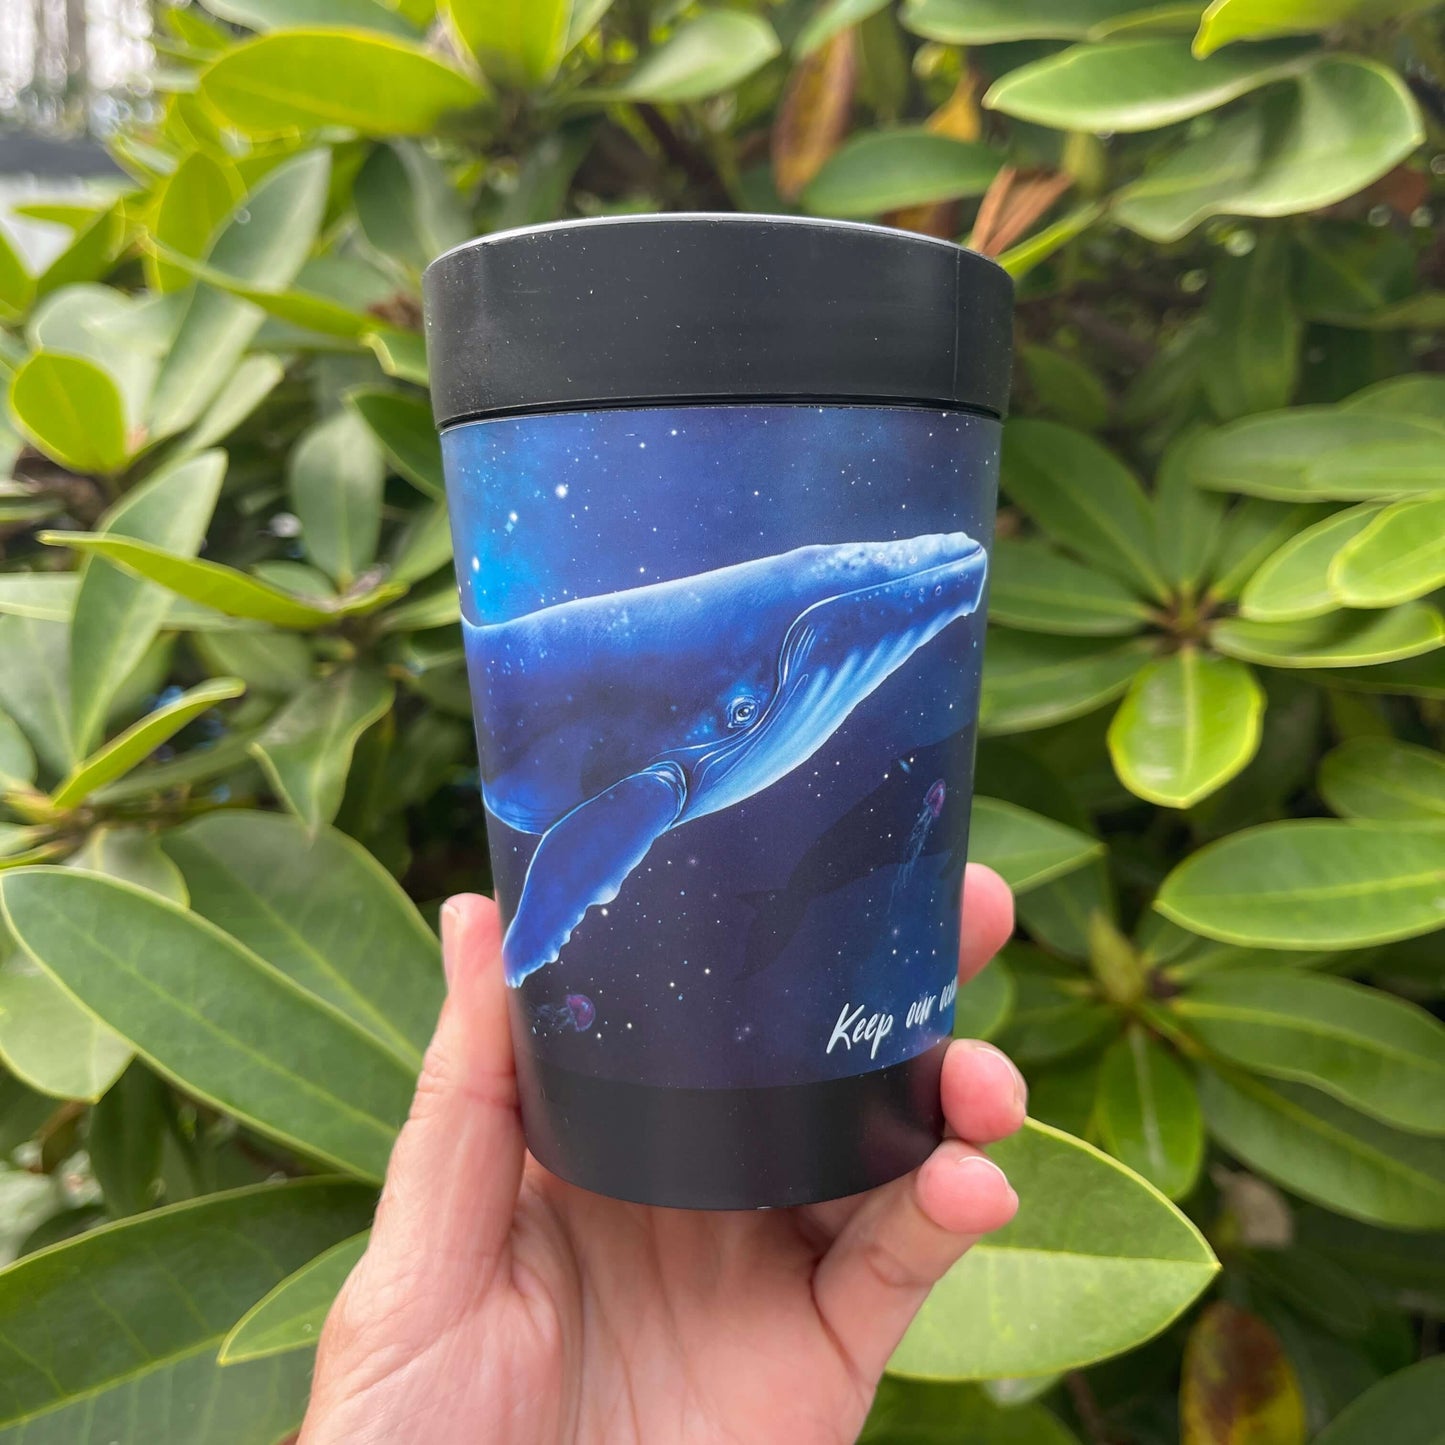 Black reusable coffee cup with blue galaxy wrap featuring a Humpback whale and the words "Keep our oceans beautiful".